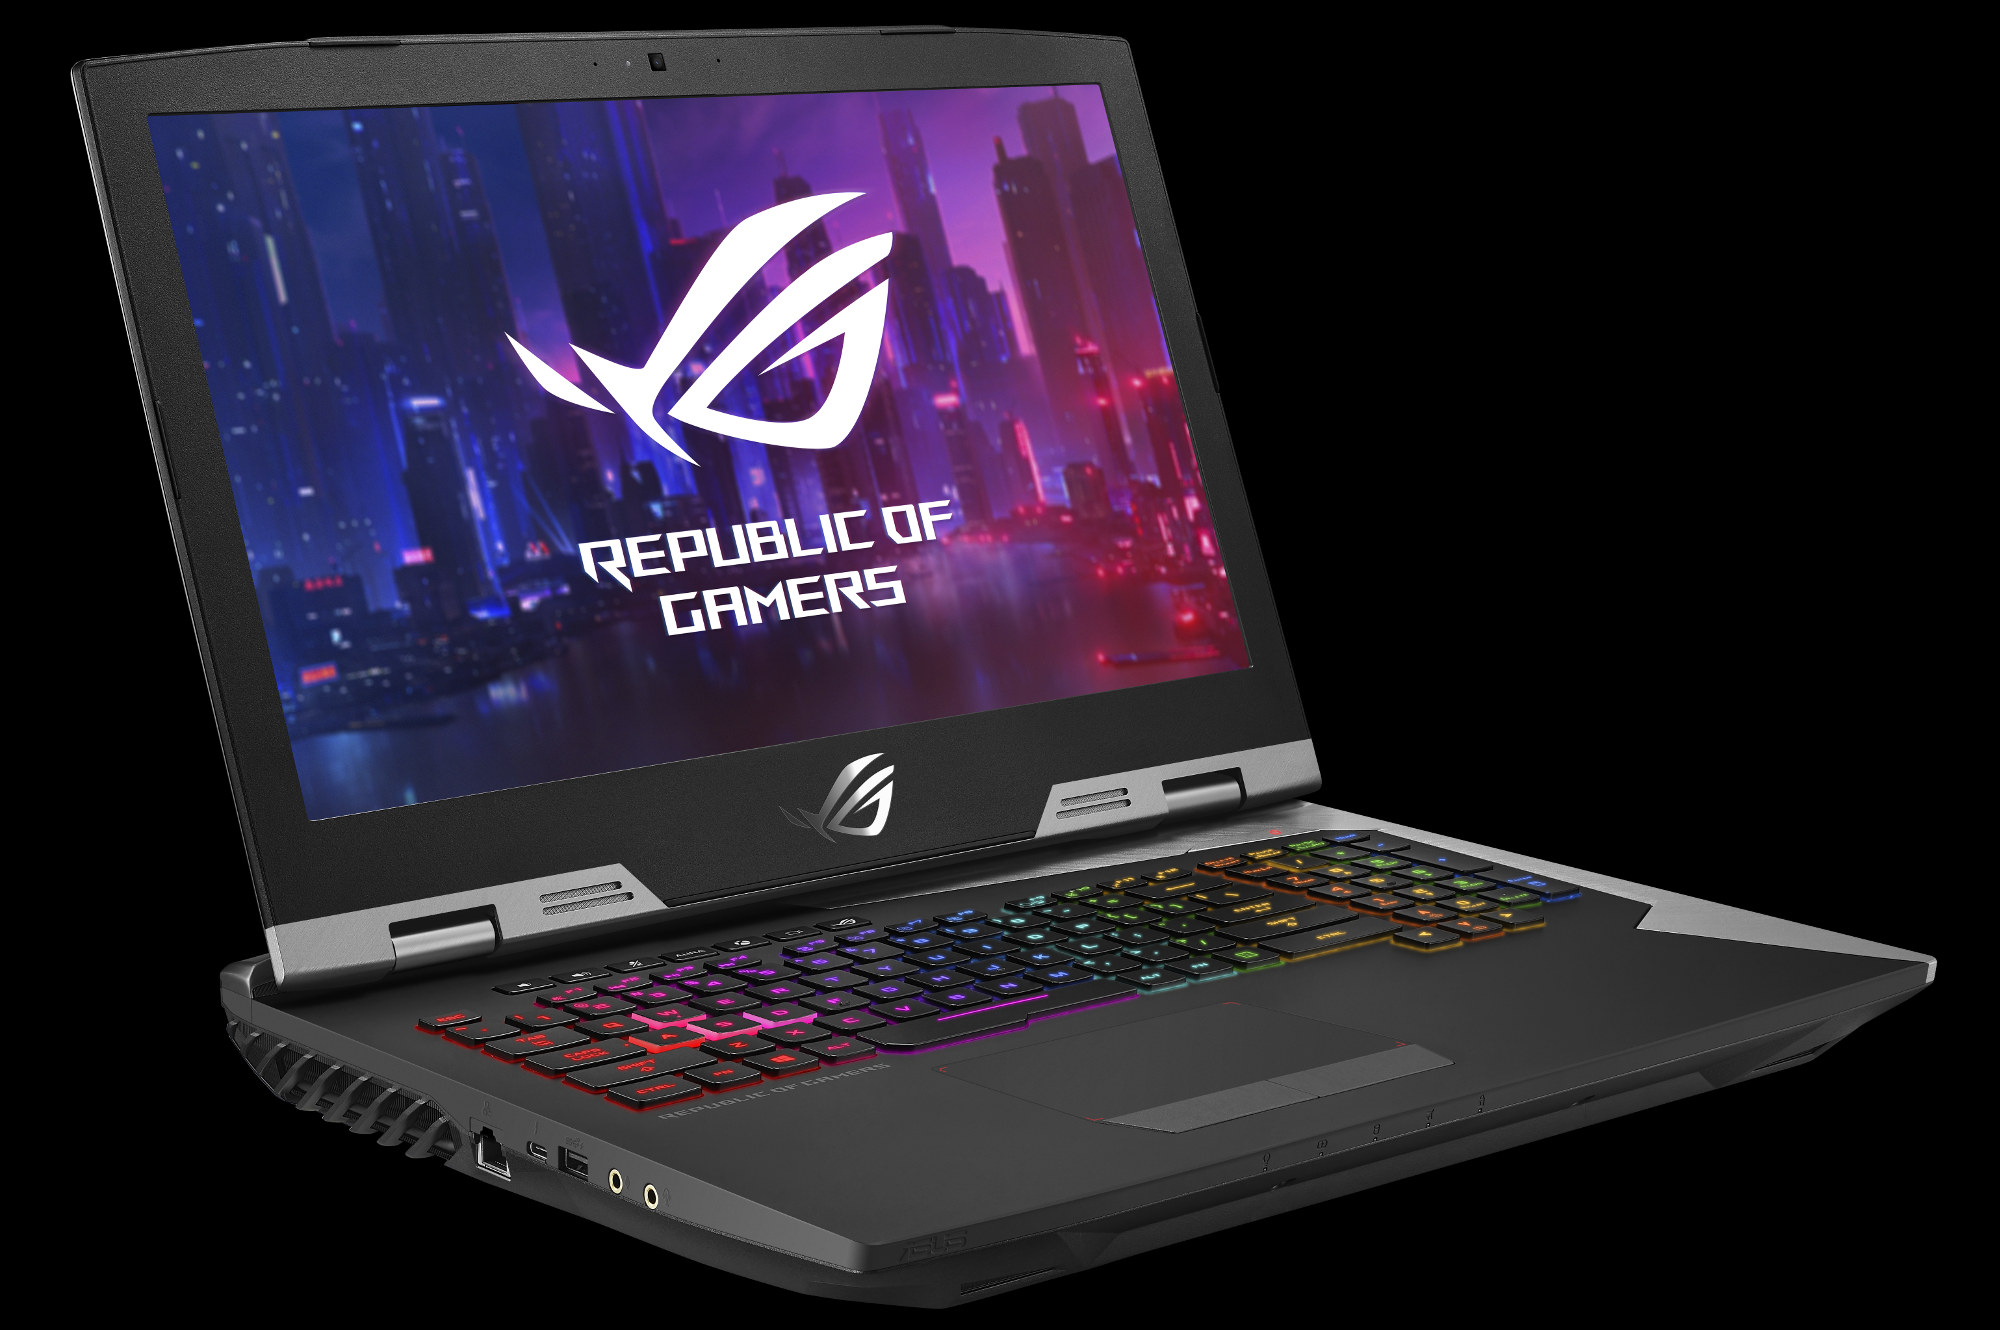 Asus Expands its ROG Lineup in India With Six New Gaming Laptops